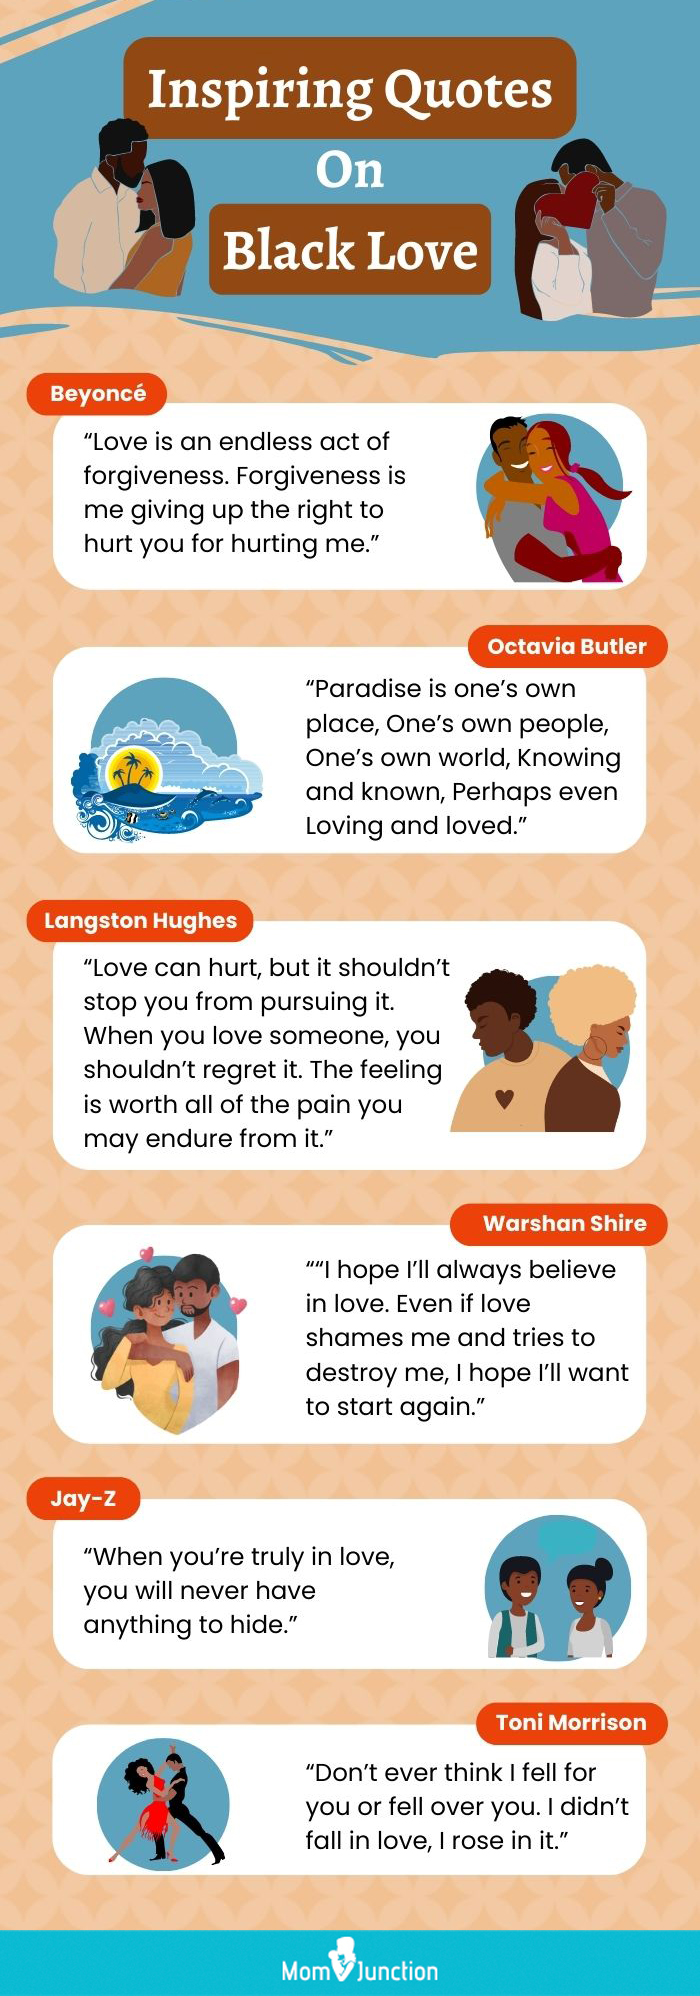 inspiring quotes on black love (infographic)